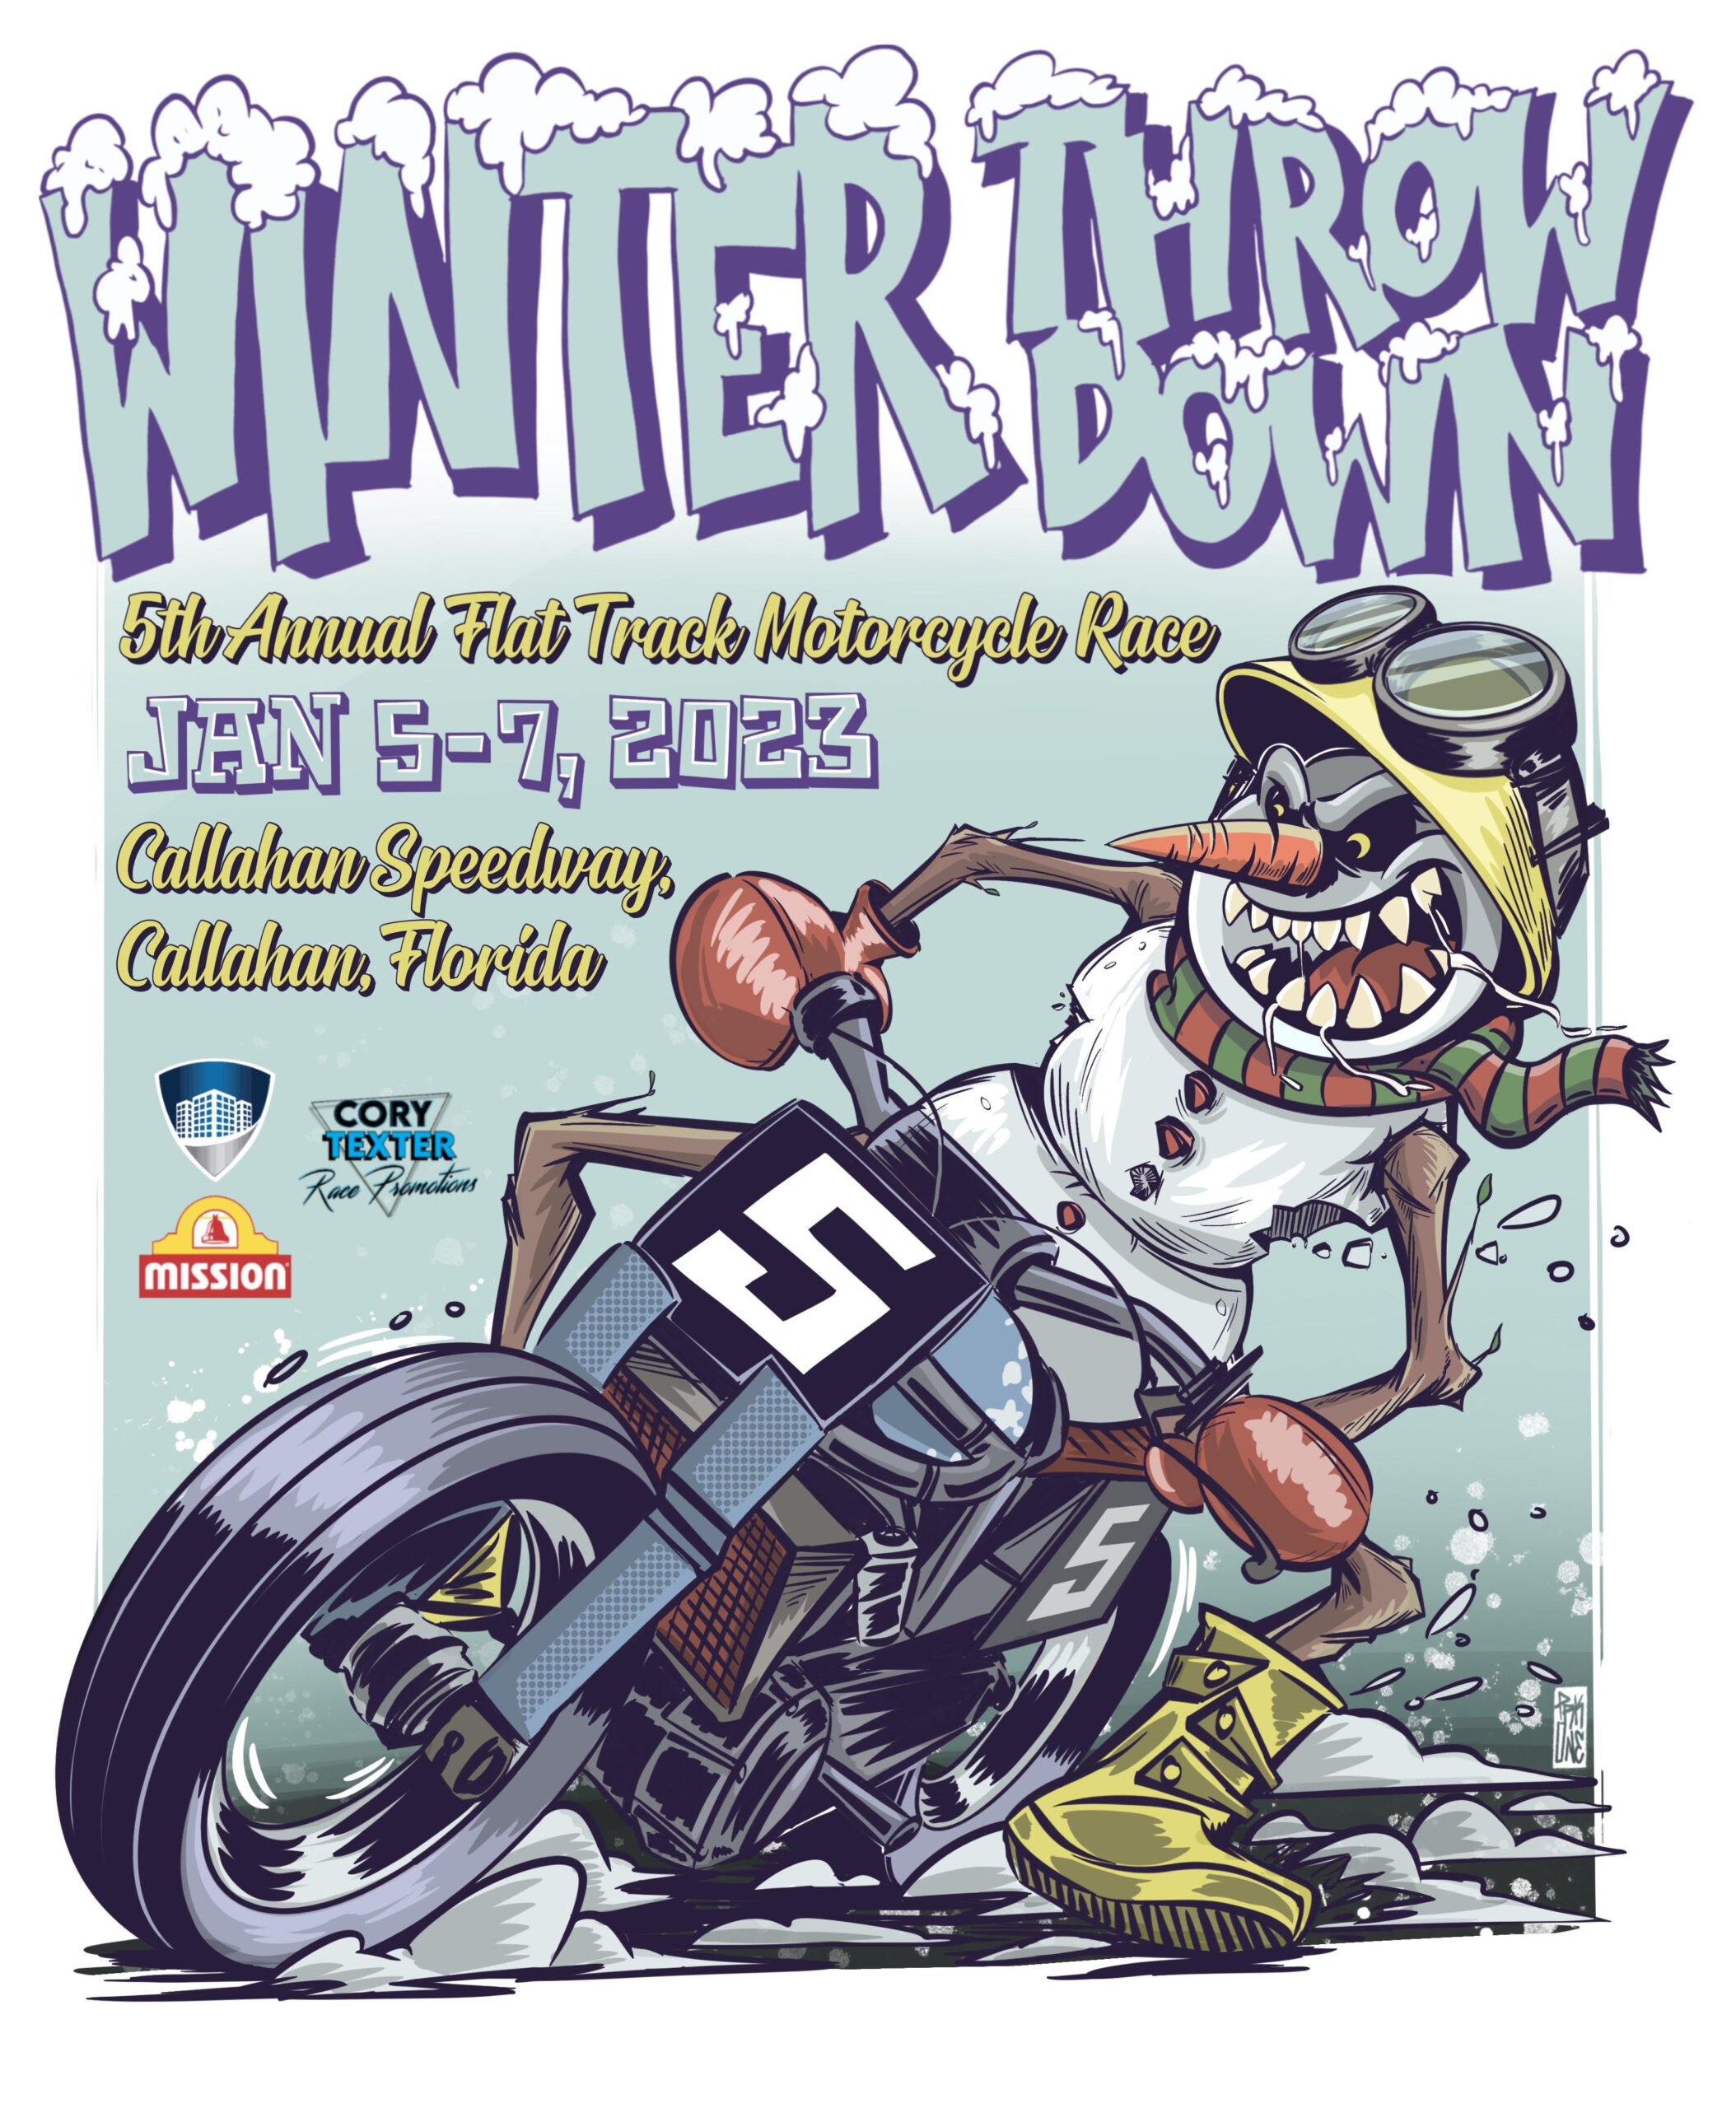 Winter Throwdown Cory Texter Promotions Flat Track Race